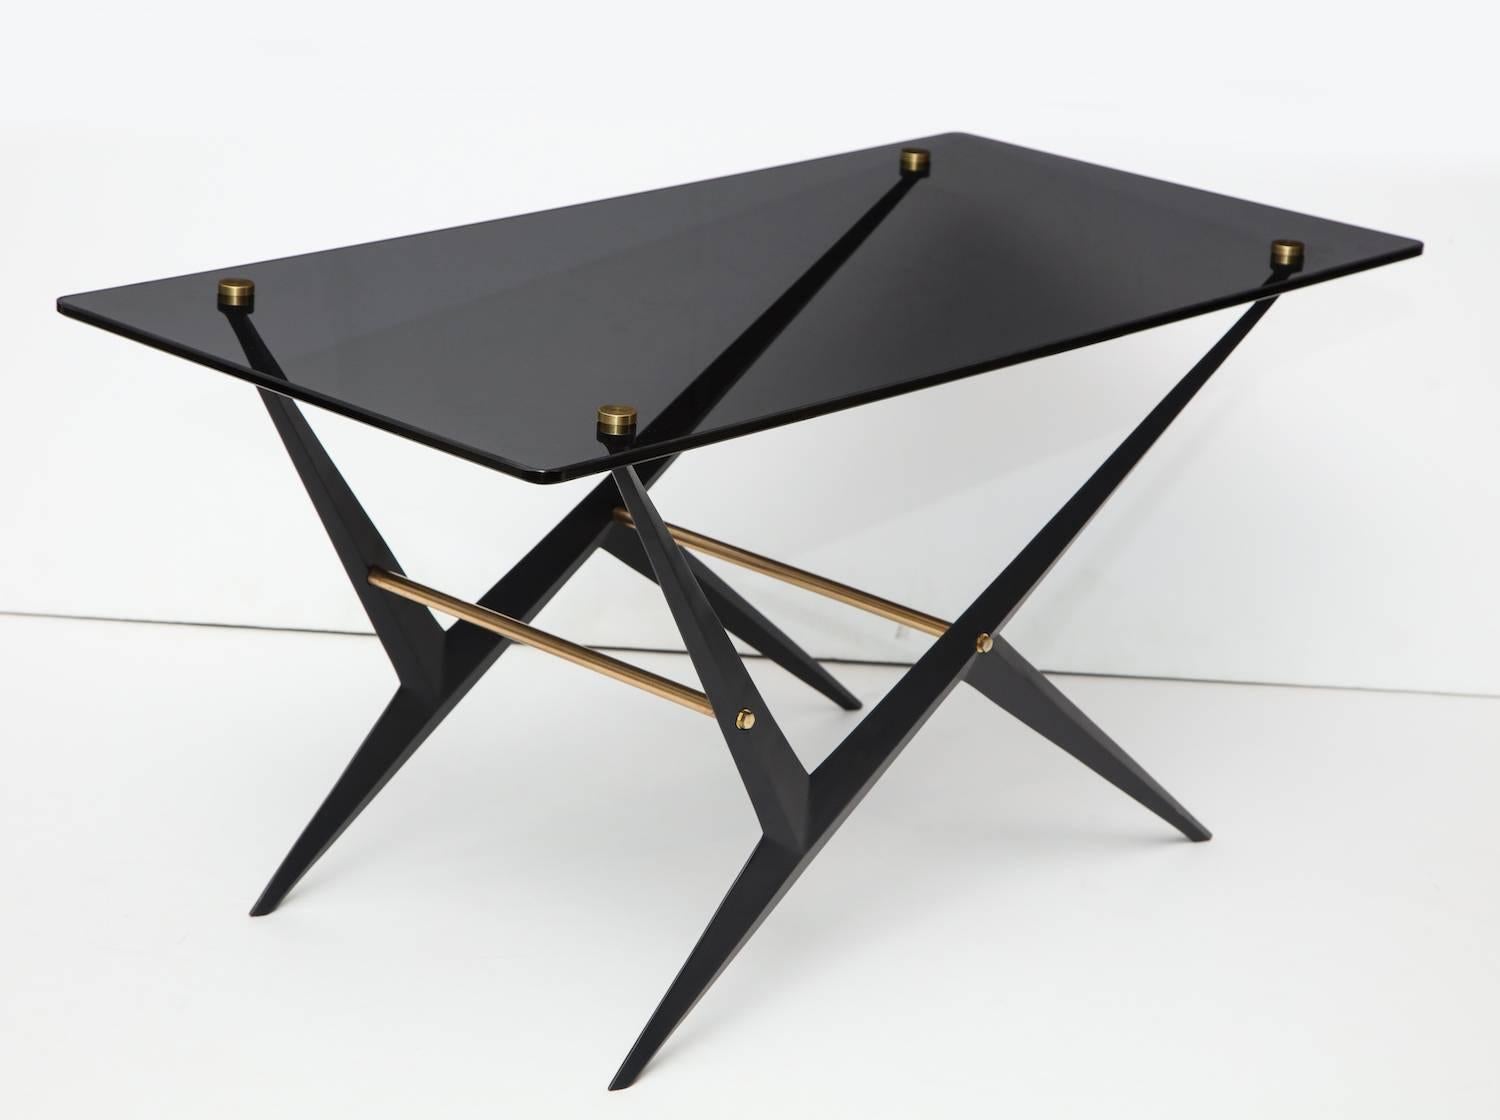 Angelo Ostuni low table. Black-painted metal with polished brass mounts and smoked glass top. A great architectural design.